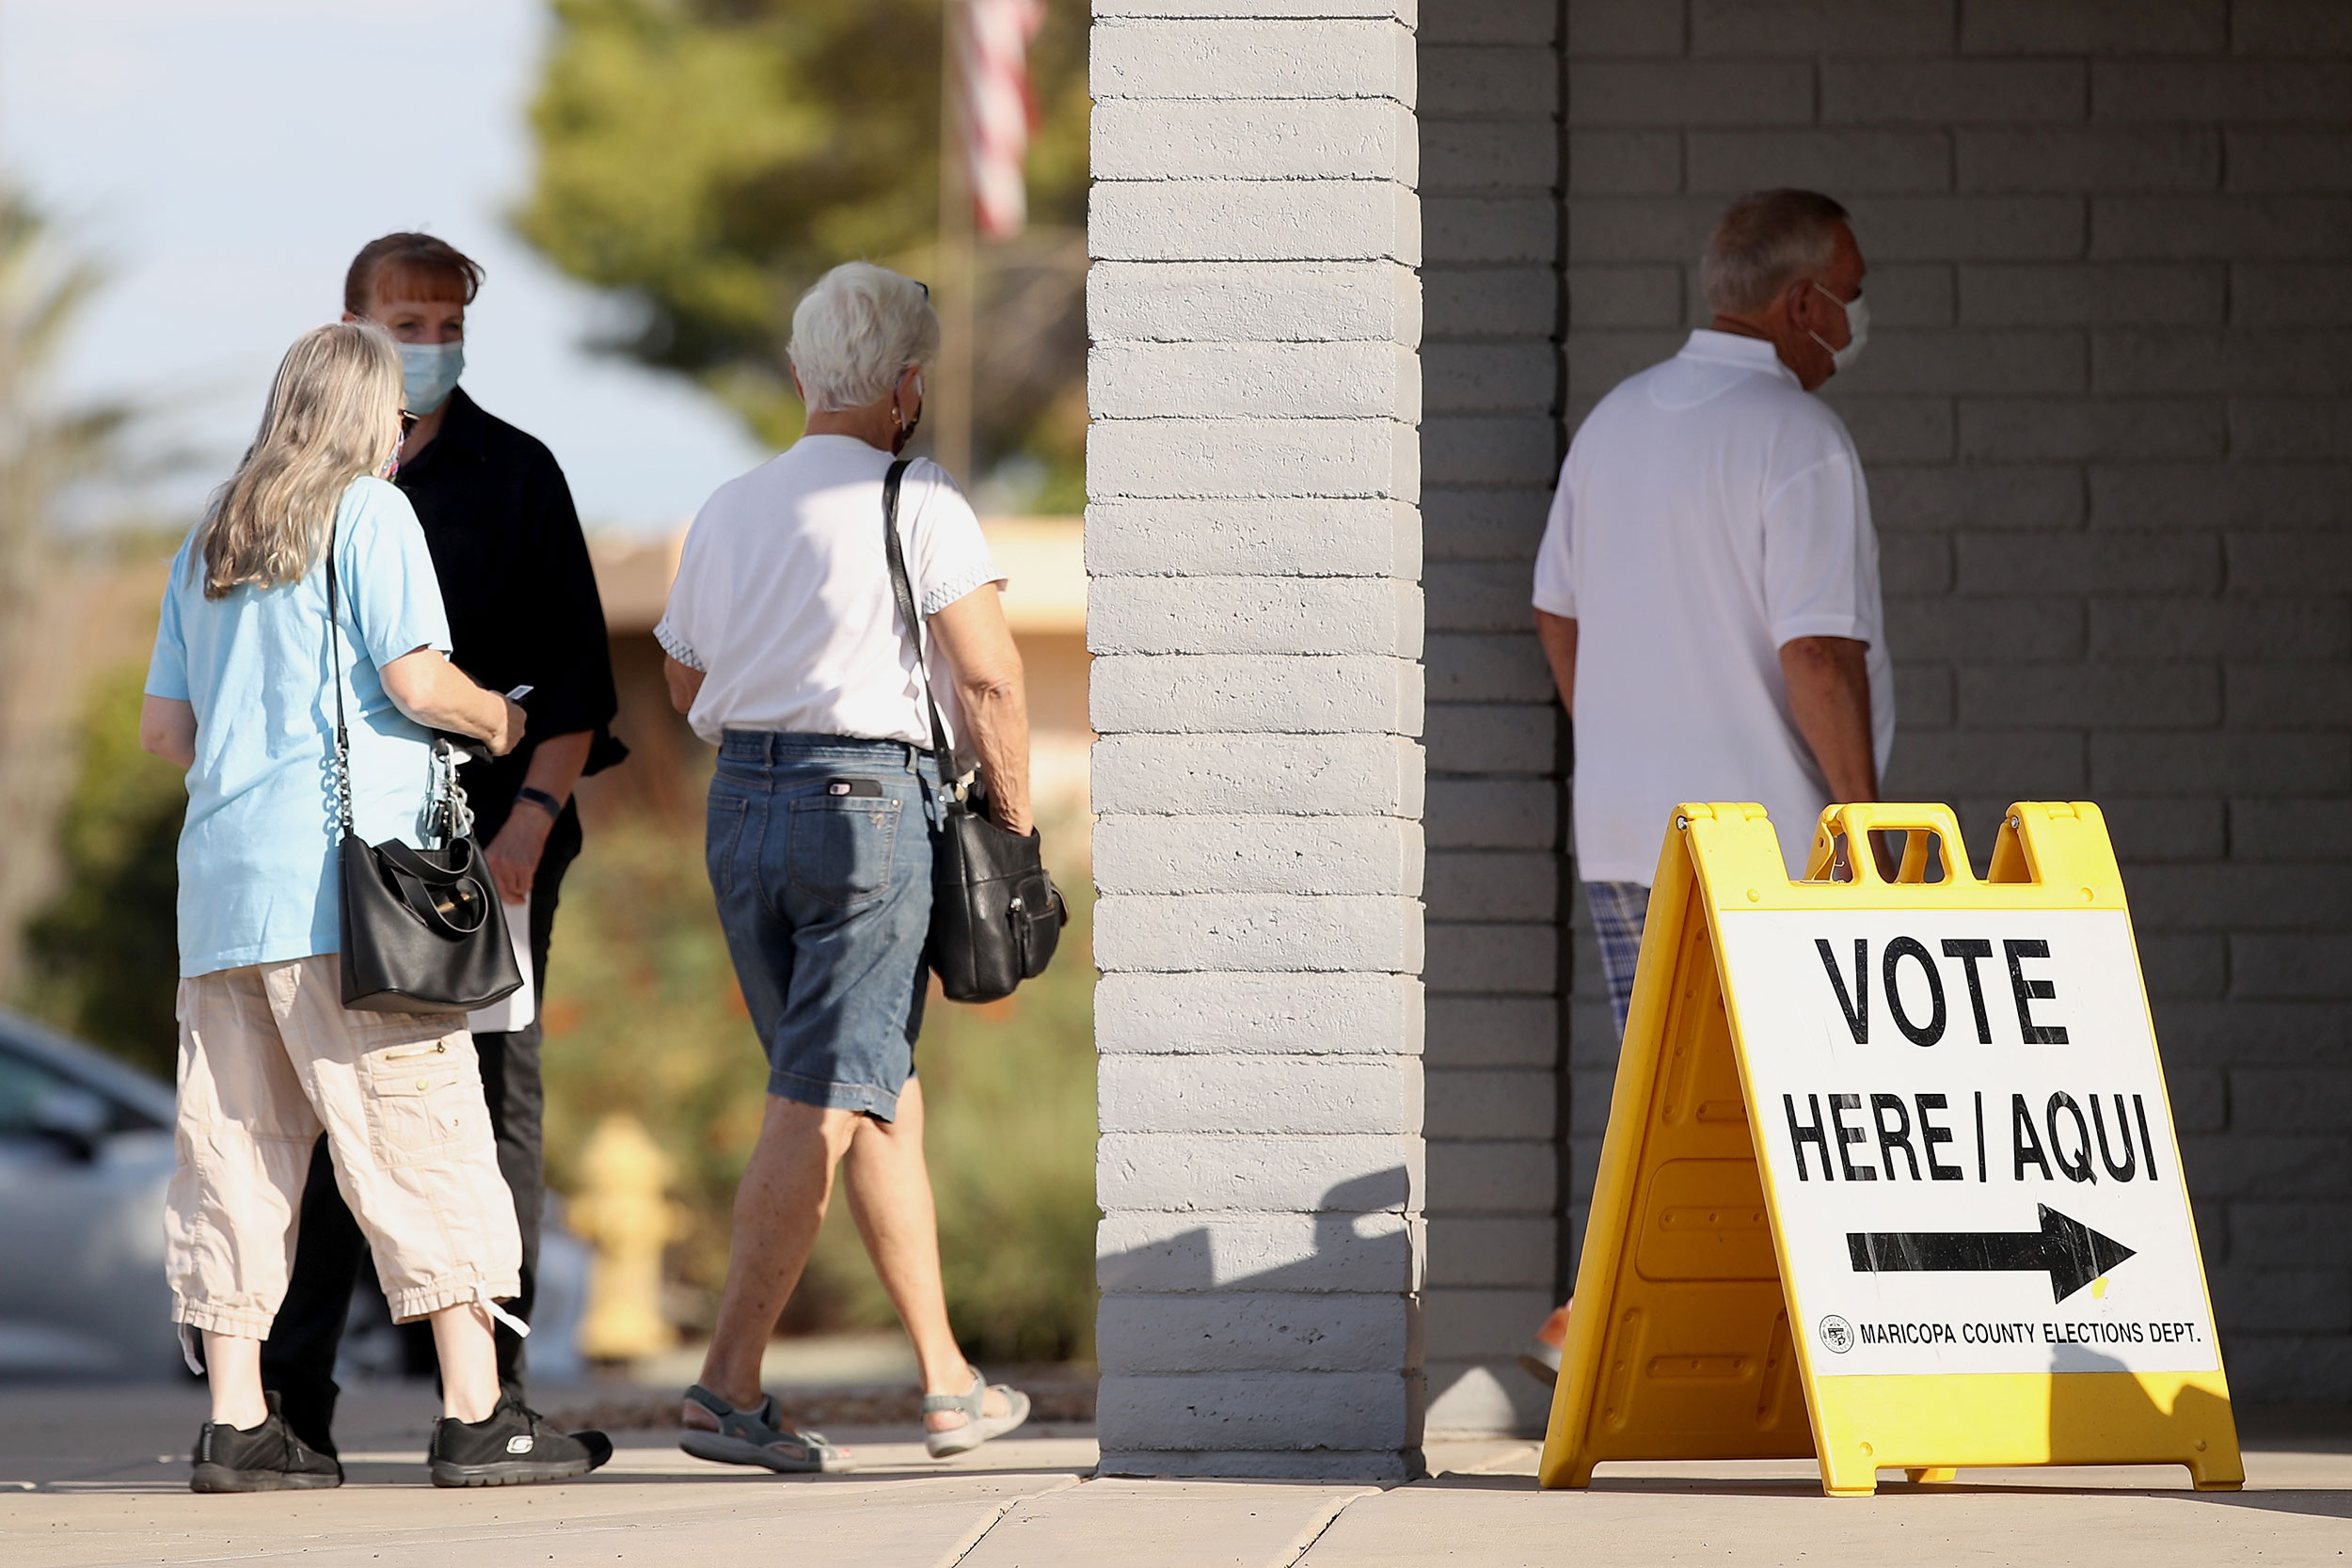 Voters arrive to a polling location in Sun City, Arizona, on November 3.